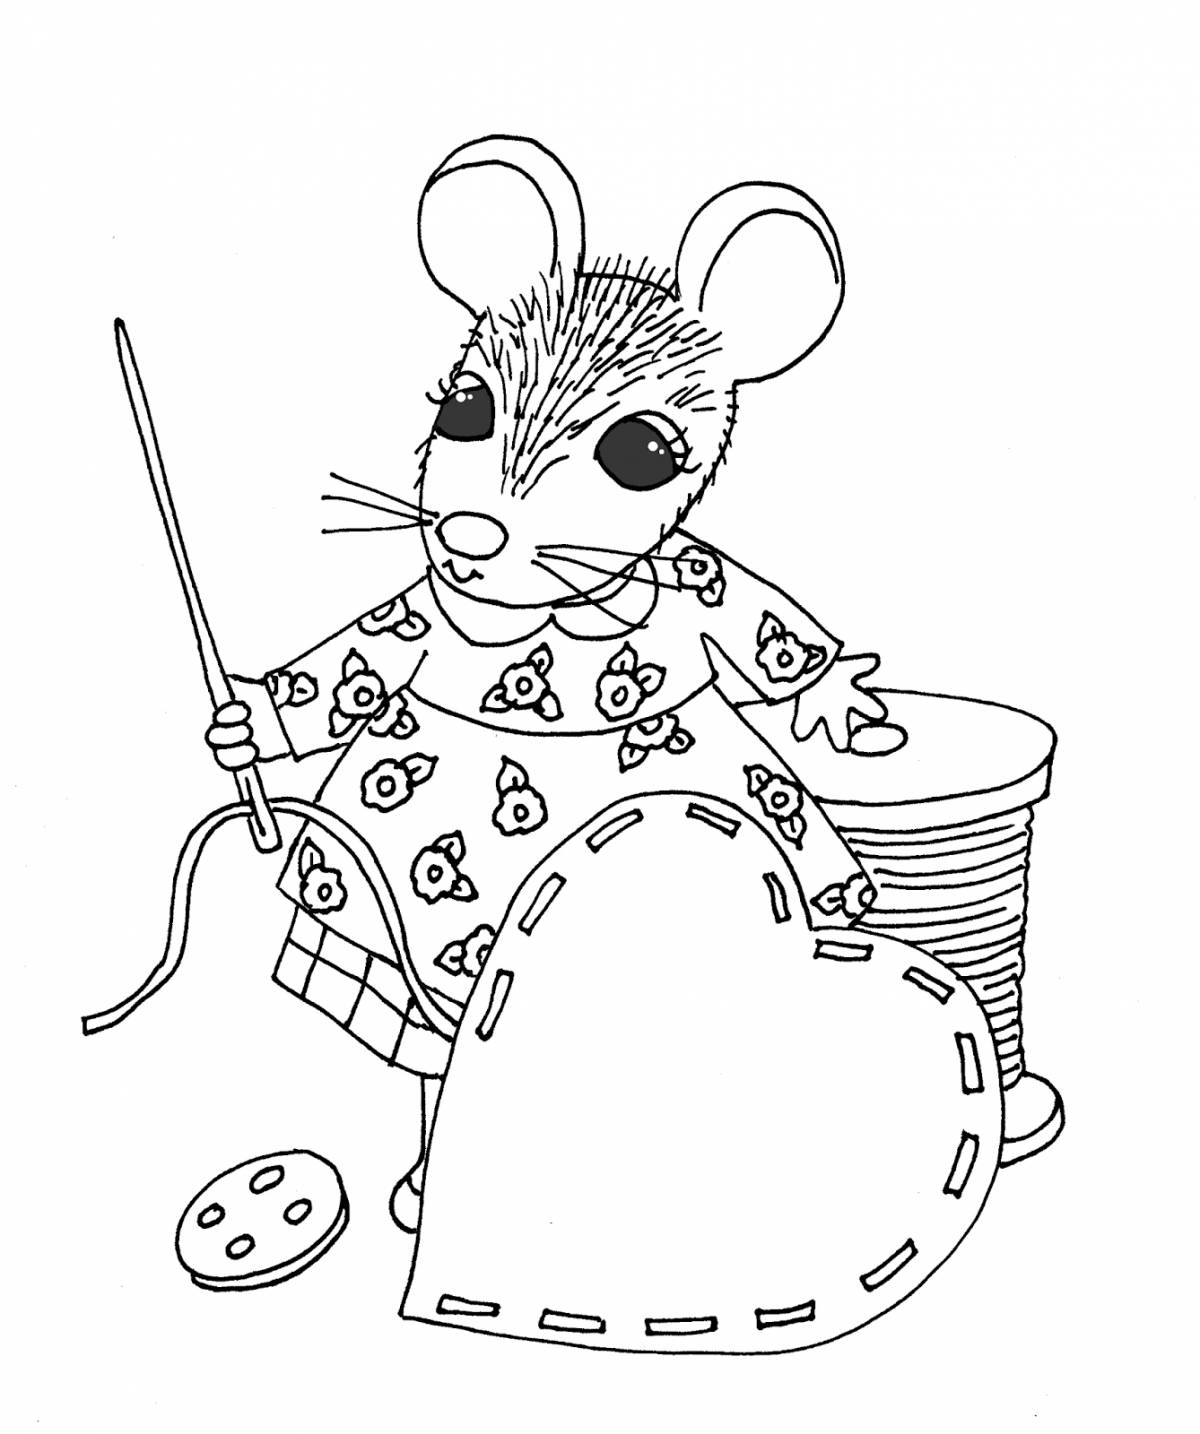 Great coloring of a silly mouse